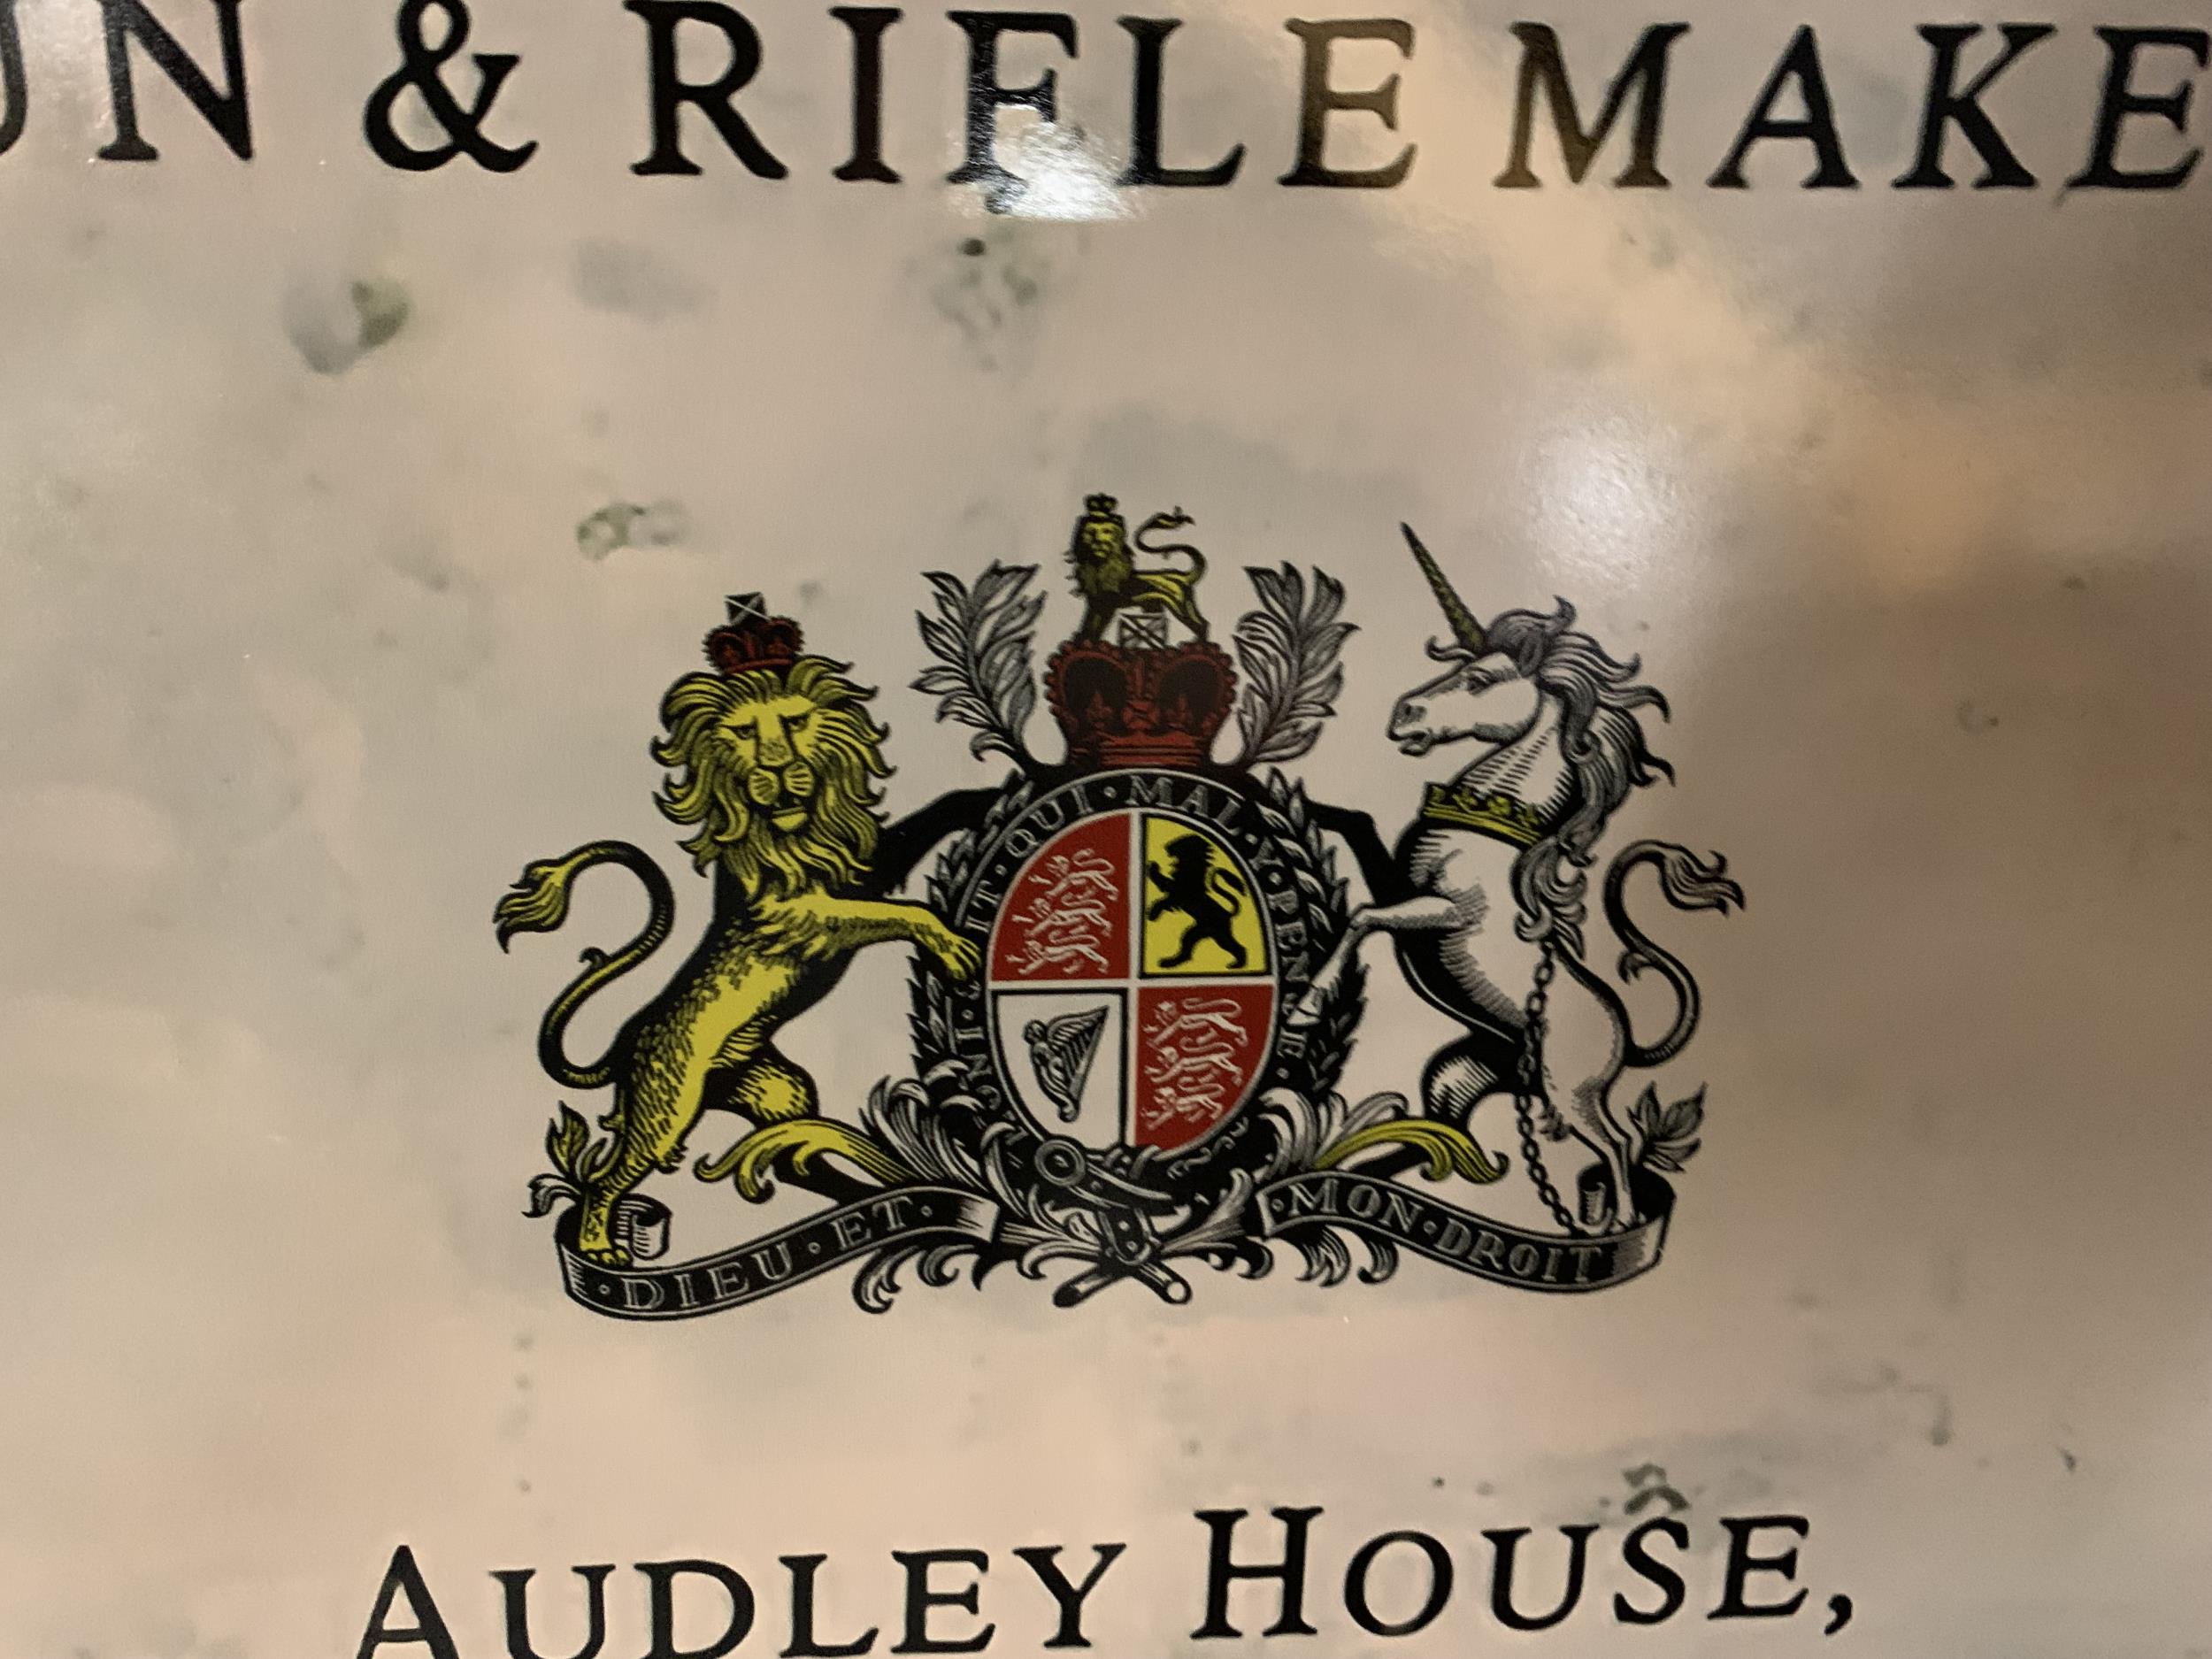 A JAMES PURDEY & SONS GUN & RIFLE MAKERS TIN SIGN 70CM X 50CM - Image 2 of 2